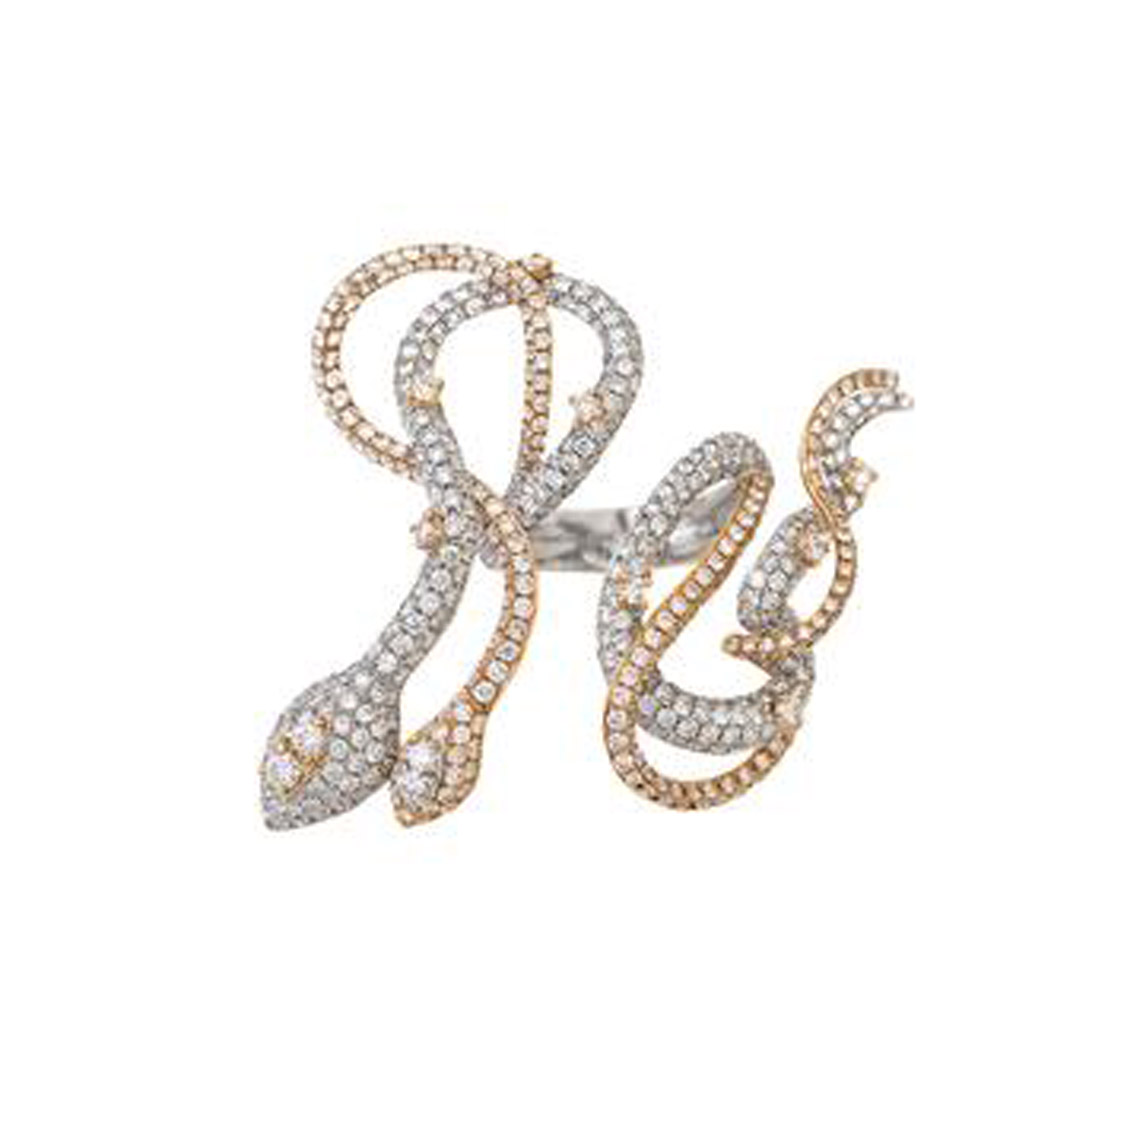 White and Rose Gold Diamond Snakes - Stefere